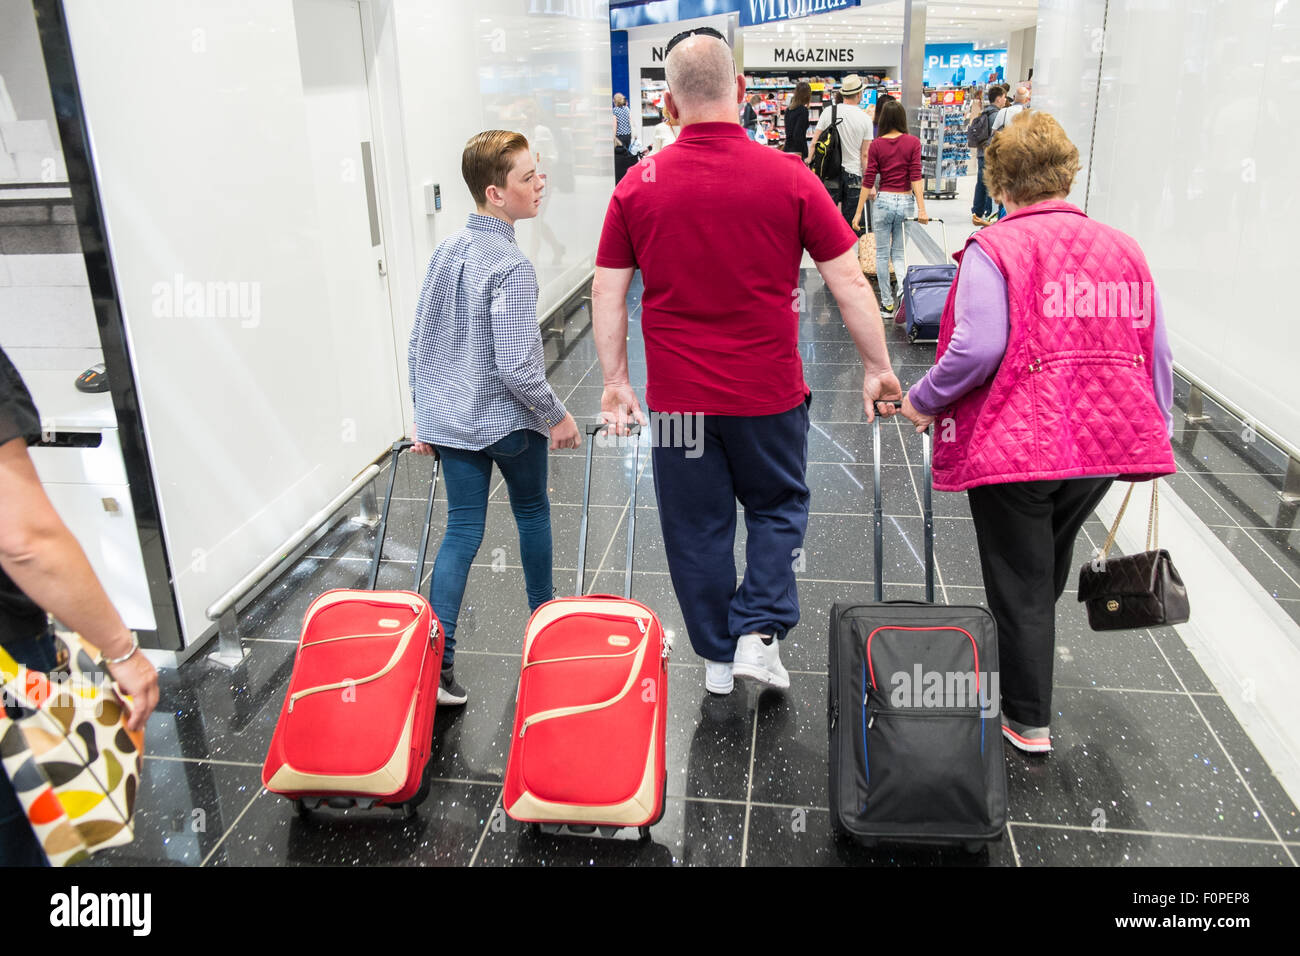 Passengers,travellers with luggage and shops,currency exchange outlets at Departures Terminal at Stansted Airport,London,U.K. Stock Photo